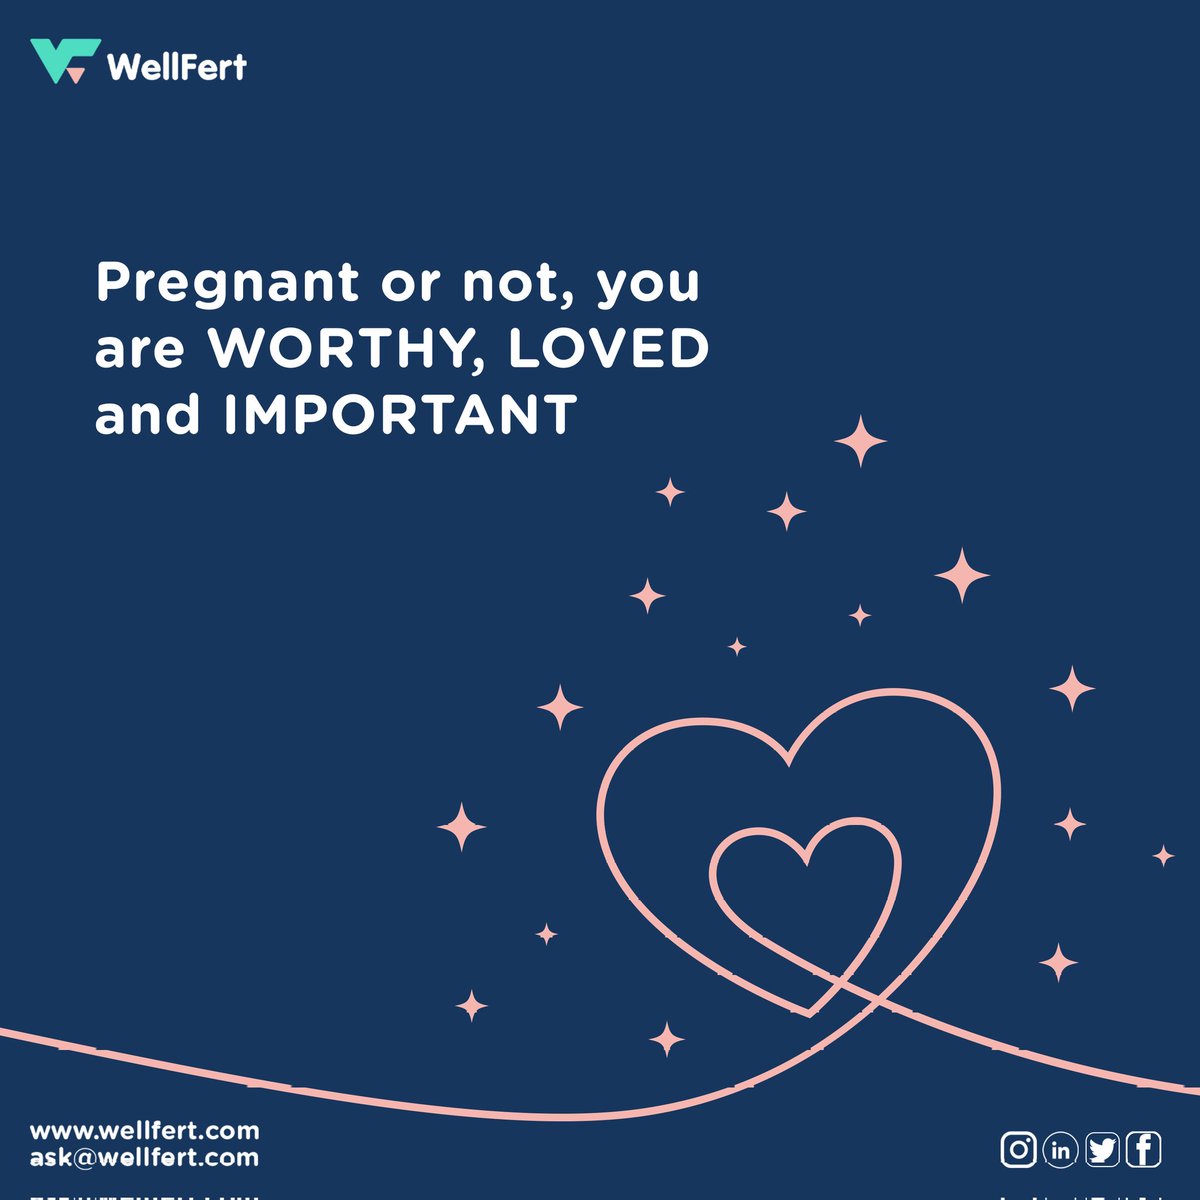 This is just a reminder that you are whole as you...

#youareenough #ownyourstorywithwf #wellfert #wfcommunity #fertilitycommunity #fertilityexpert #fertilityfacts #fertilitytreatment #healthandwellness #infertilityawareness #infertilitytopregnancys #infertilityrisk